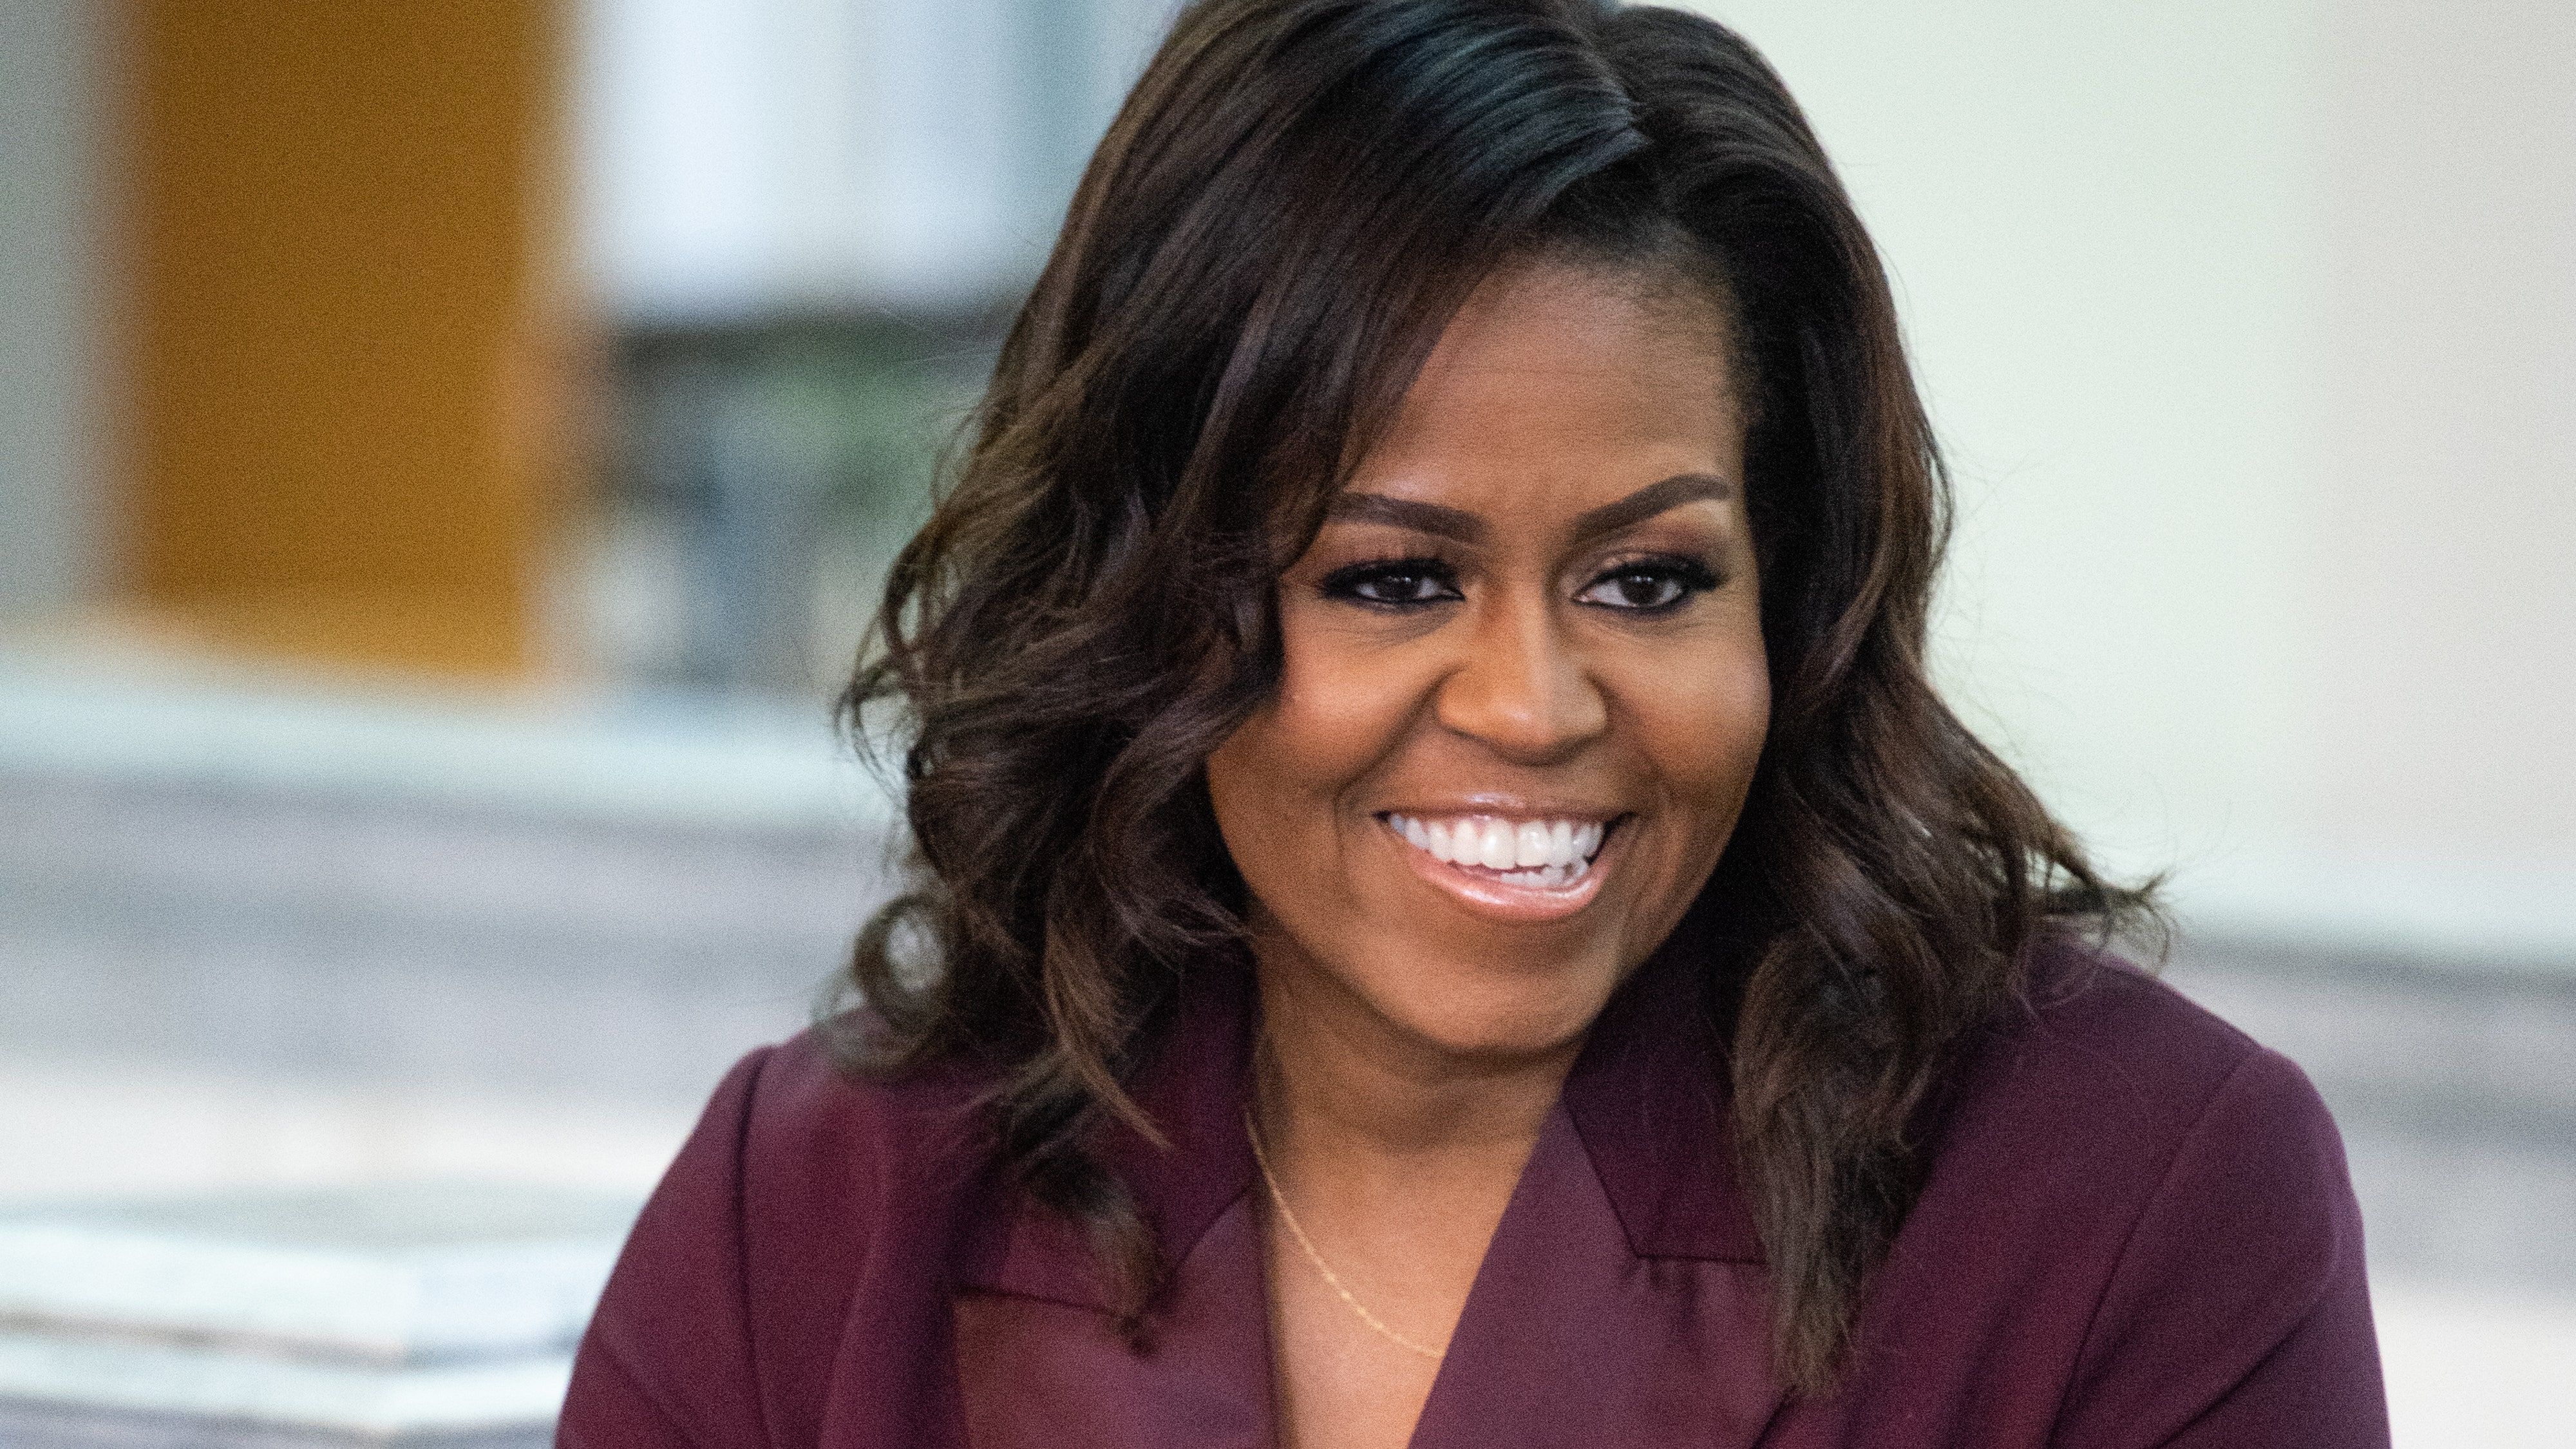 Michelle Obama Wore Her Natural Curls, and People Are Living for